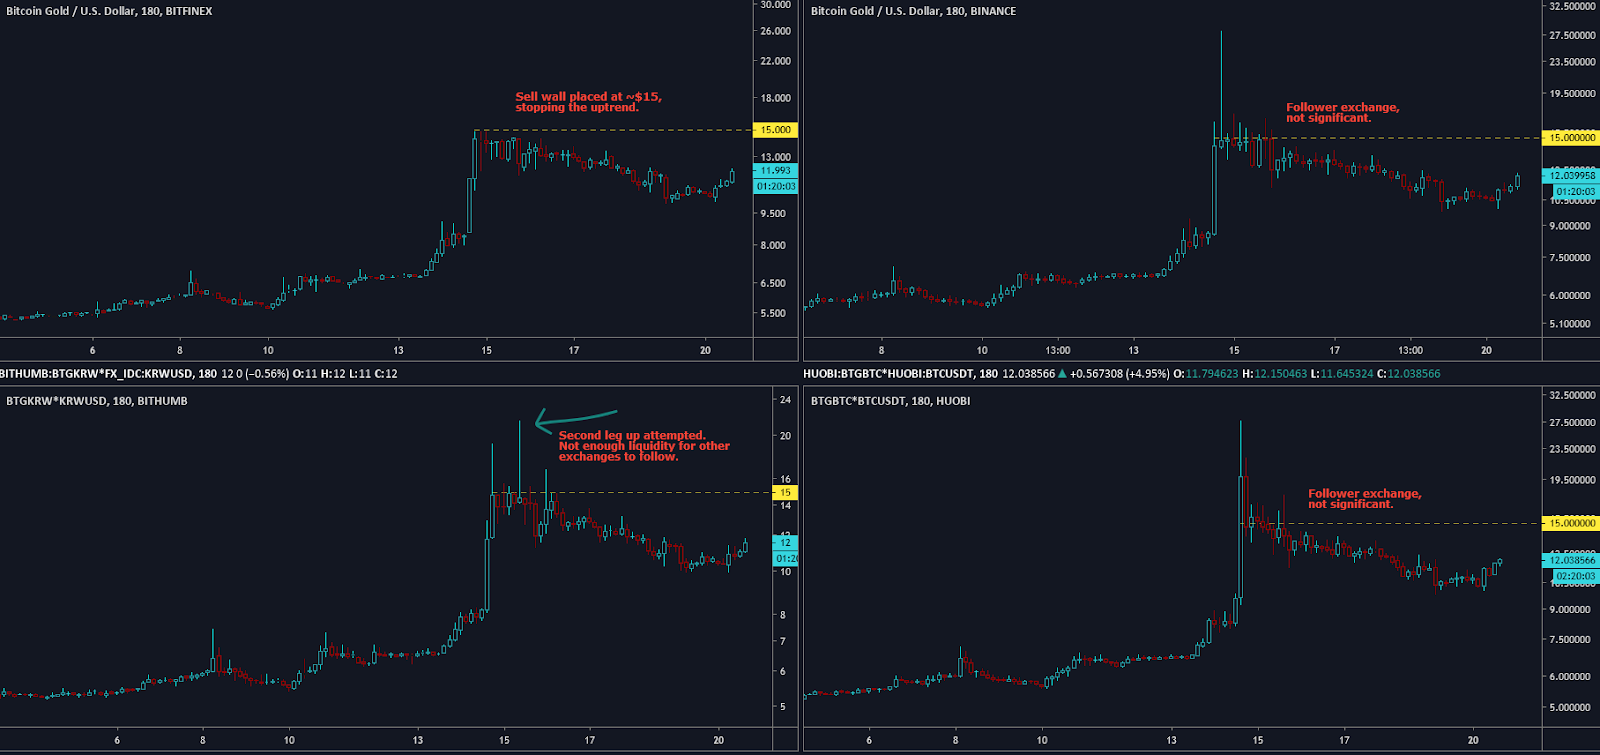 Comparison of exchange activity. Source: Onlyforesight.com and TradingView.